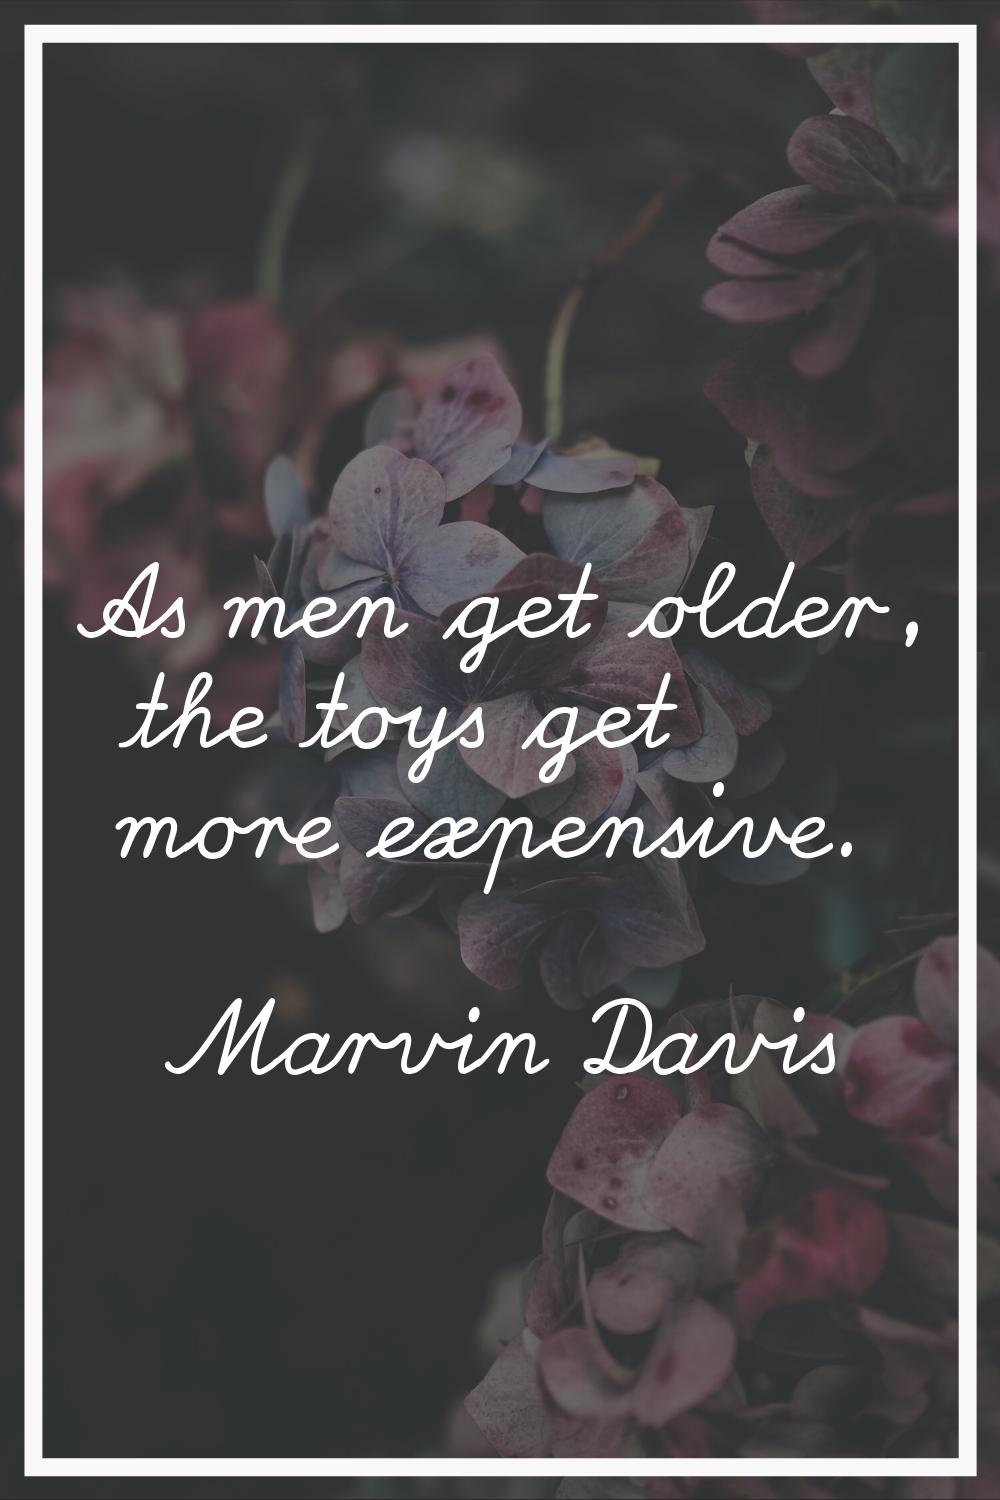 As men get older, the toys get more expensive.